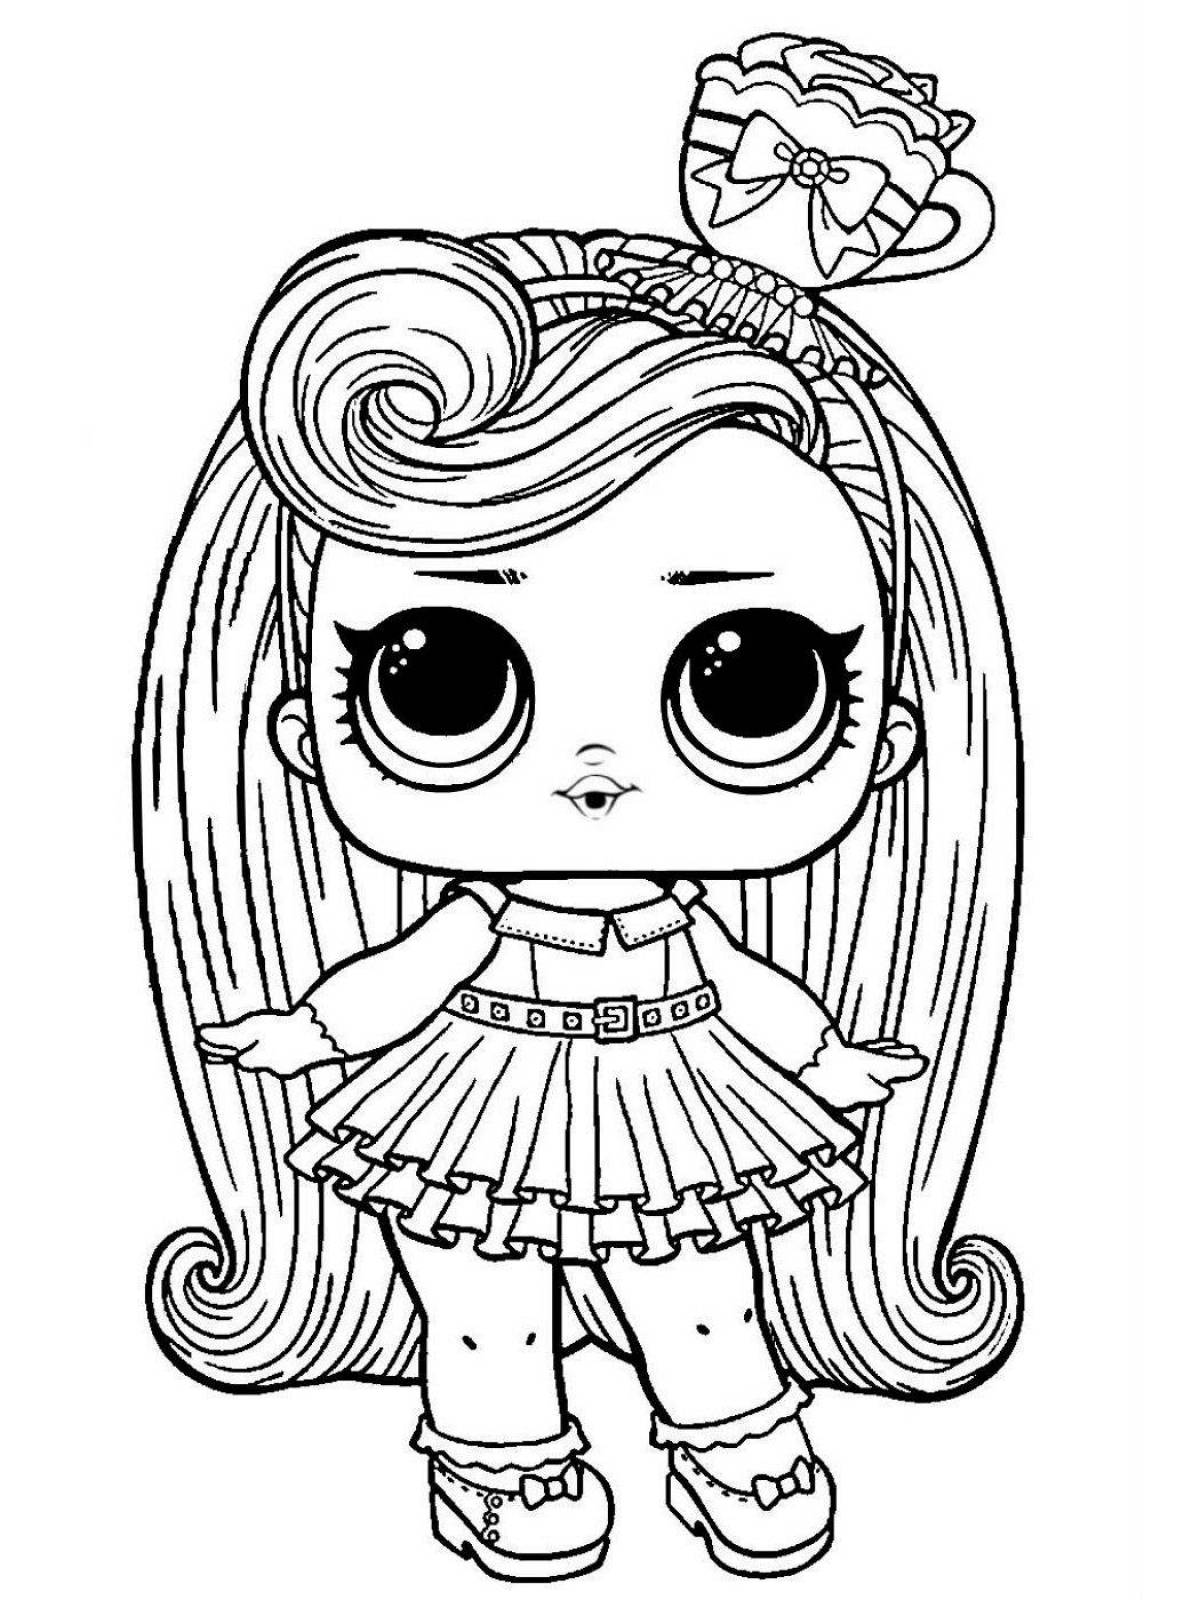 Amazing coloring pages for girls lol new